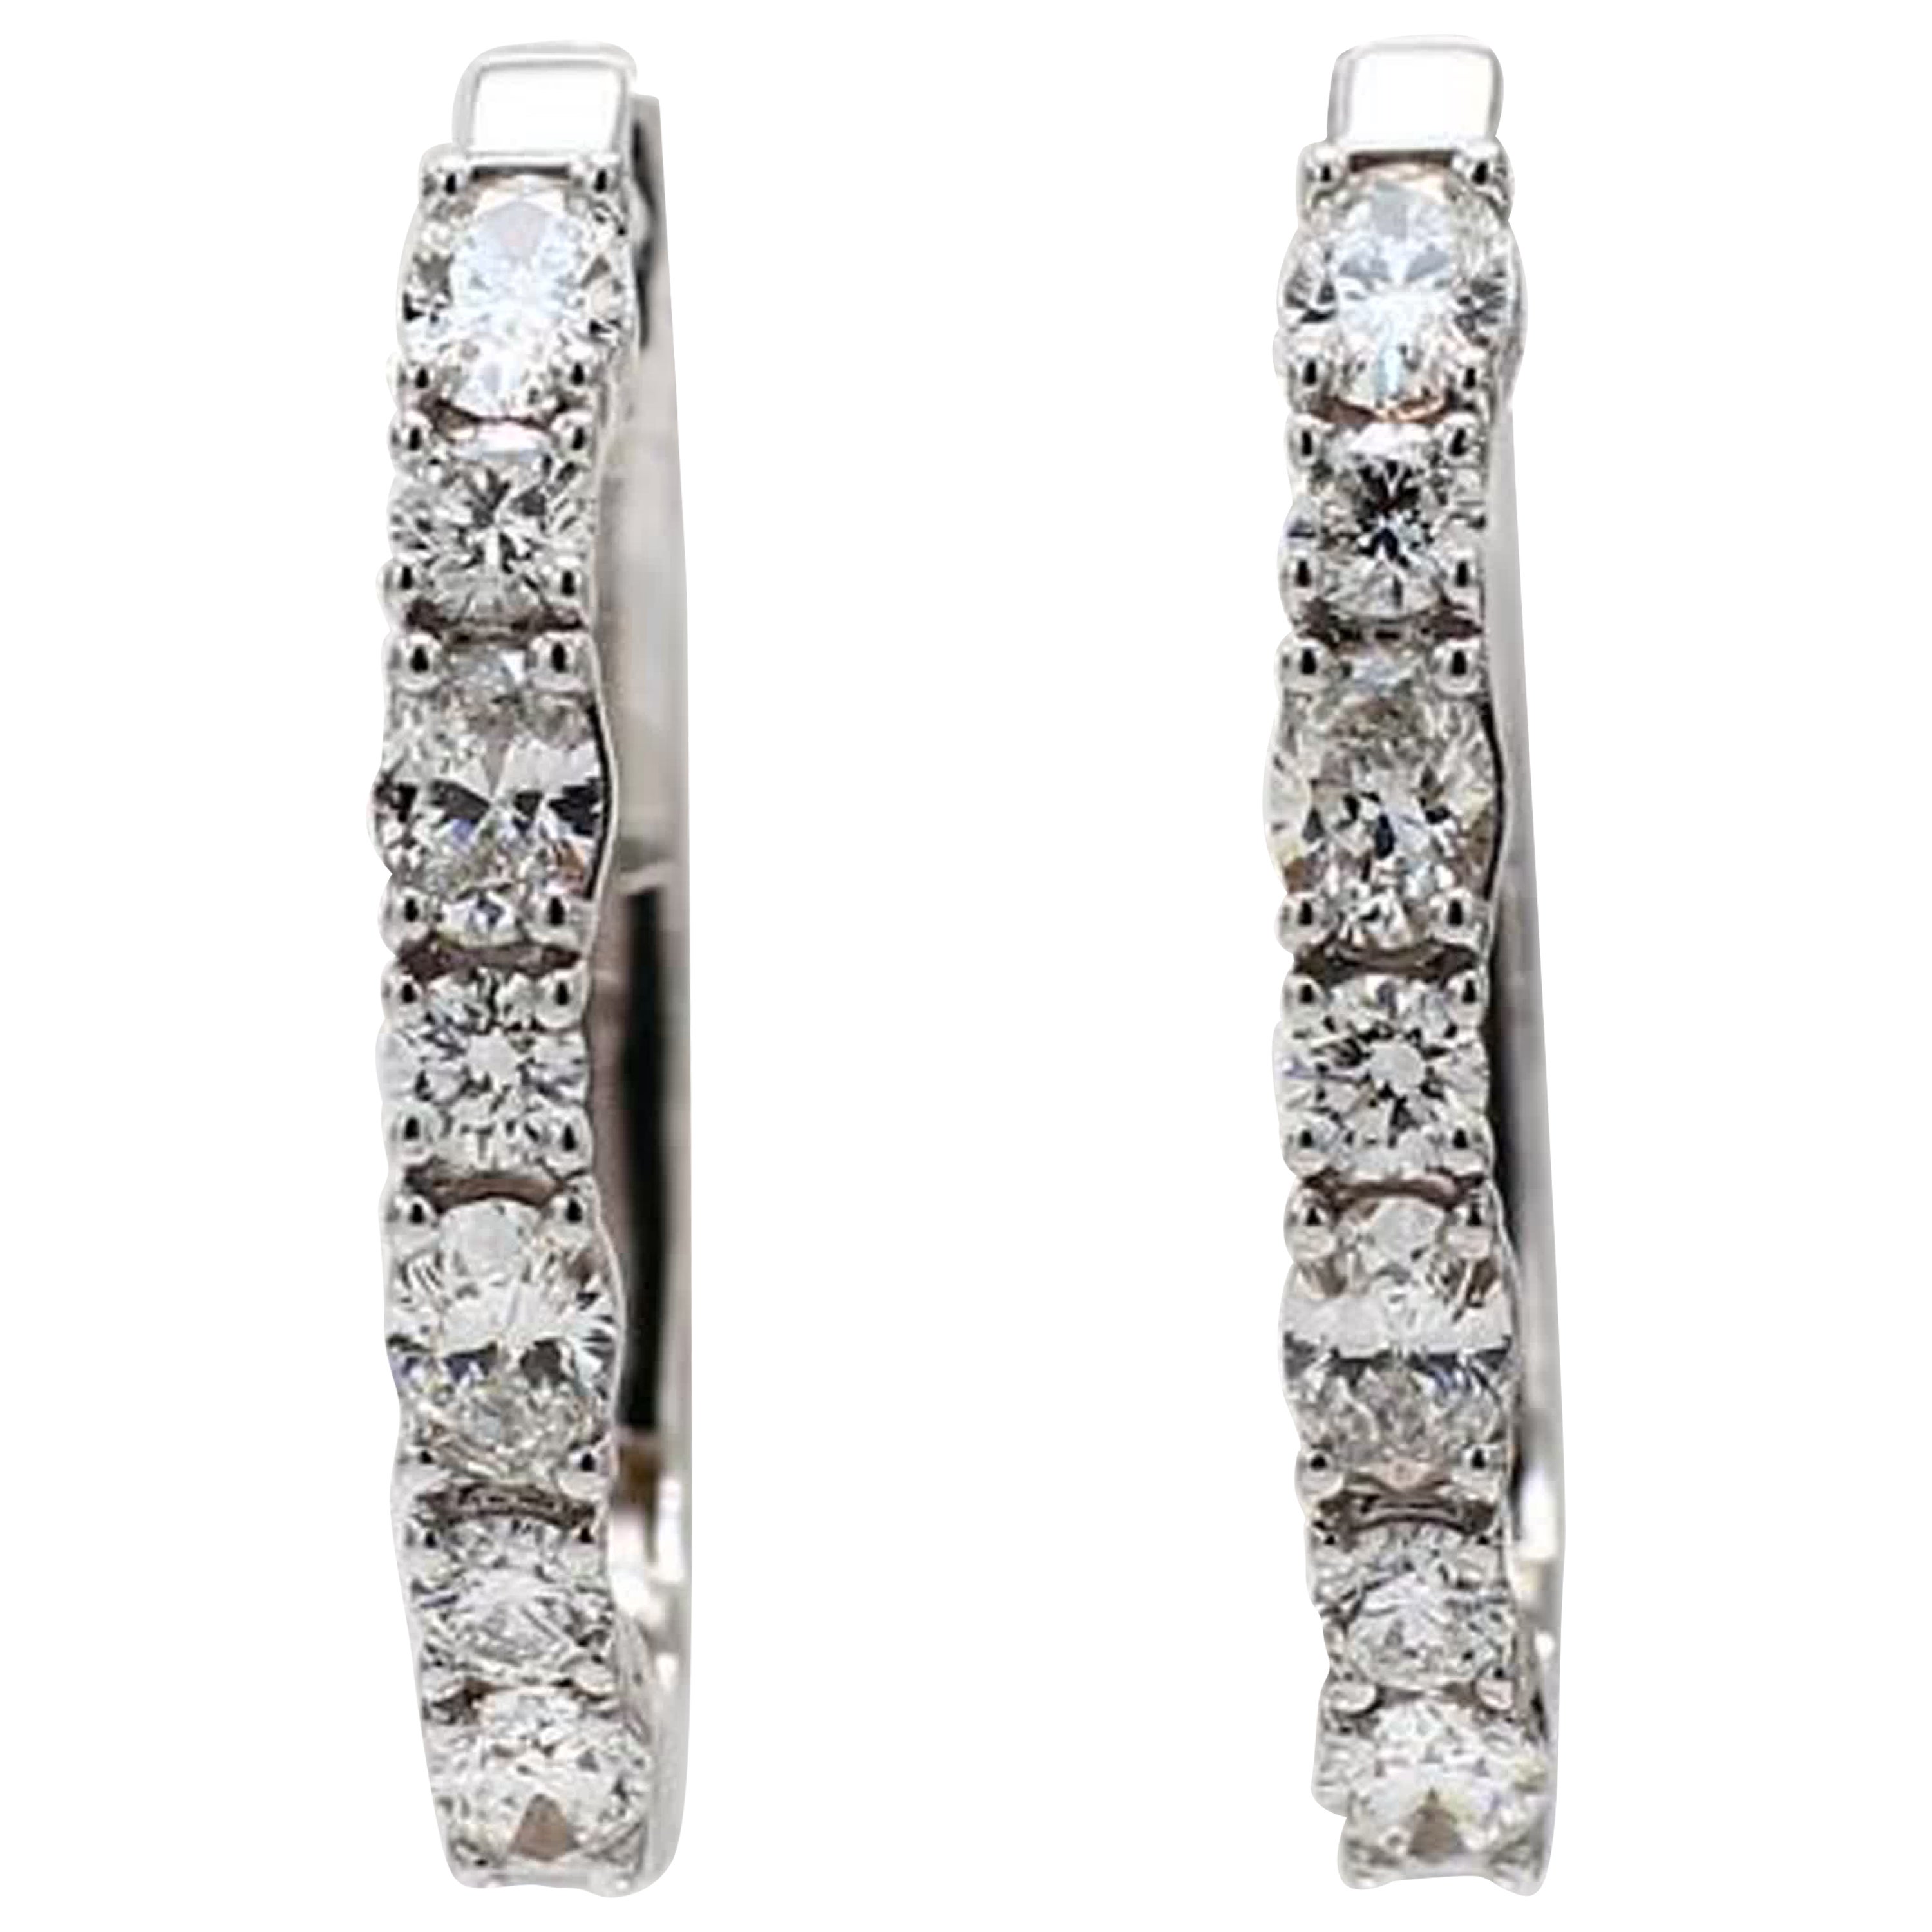 Natural White Oval Diamond 1.67 Carat TW White Gold Loop Earrings